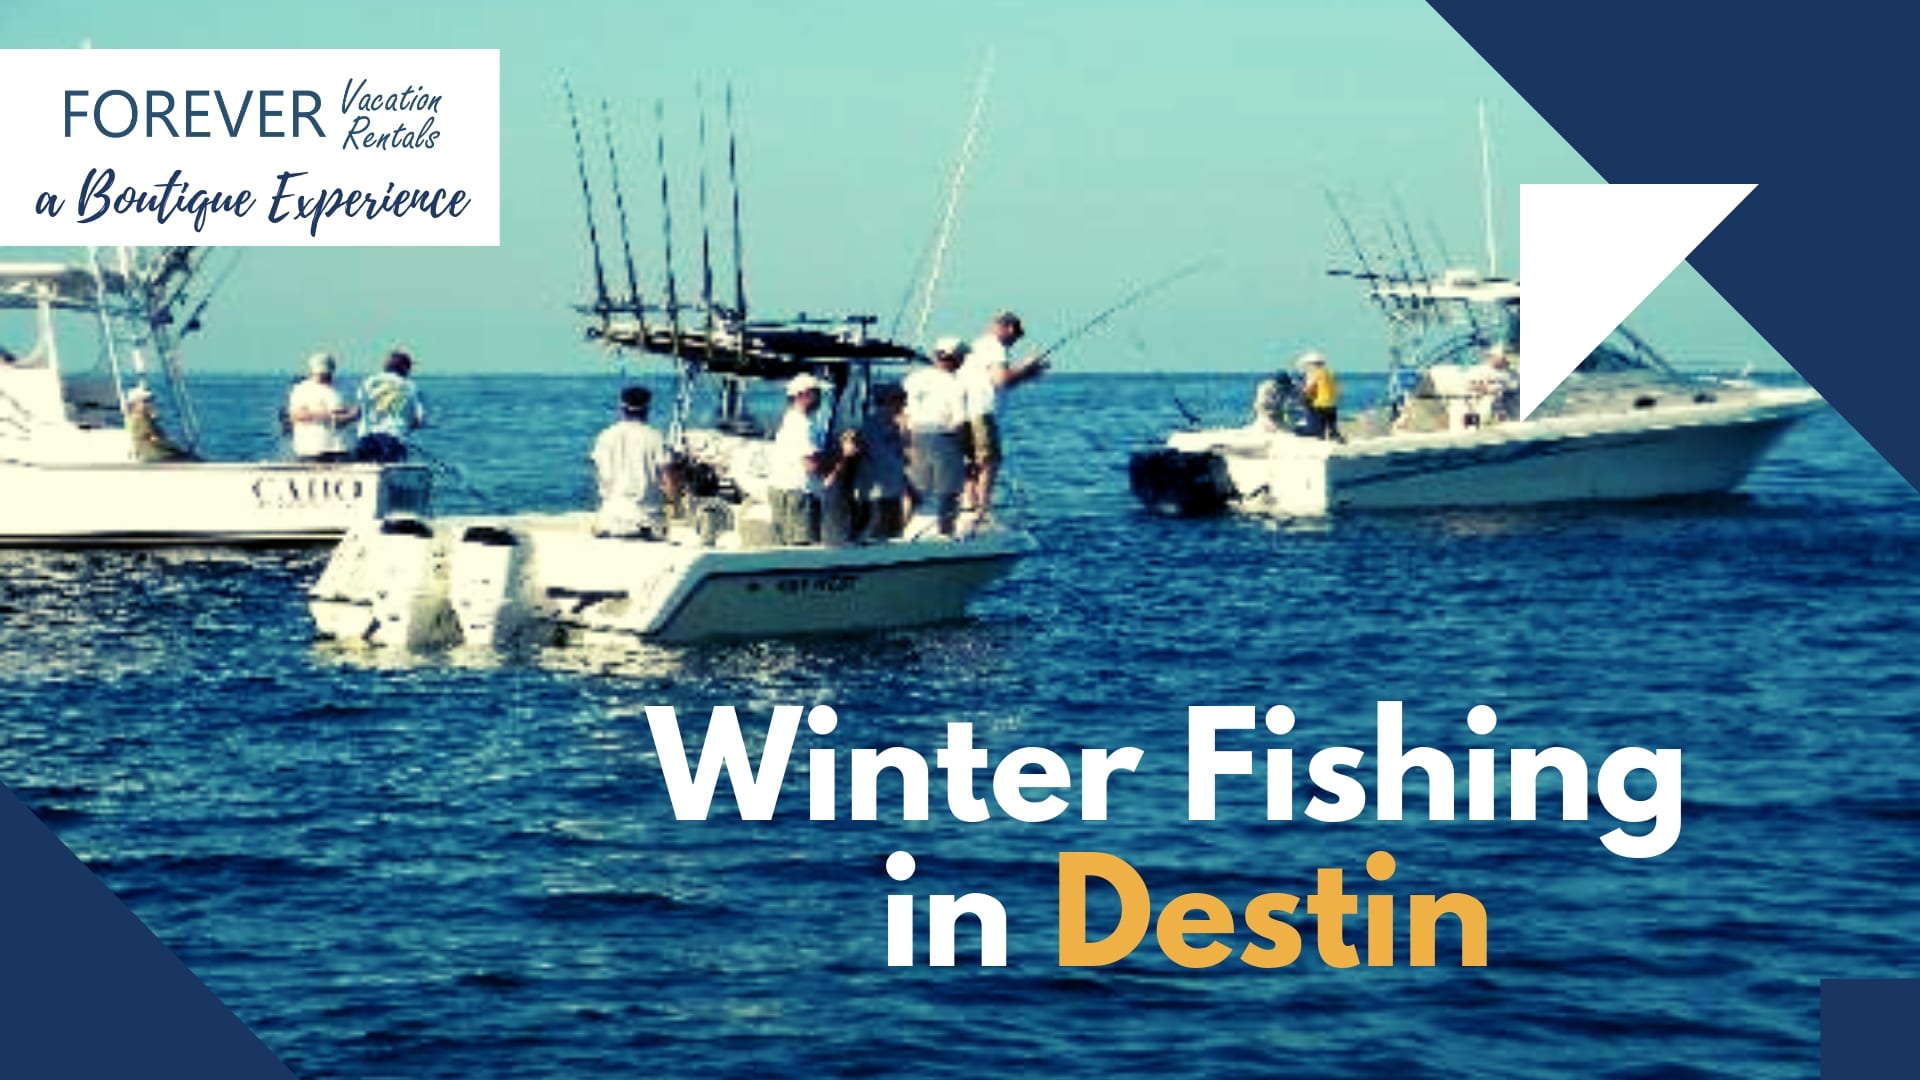 Everything You Need to Know About Winter Fishing in Destin